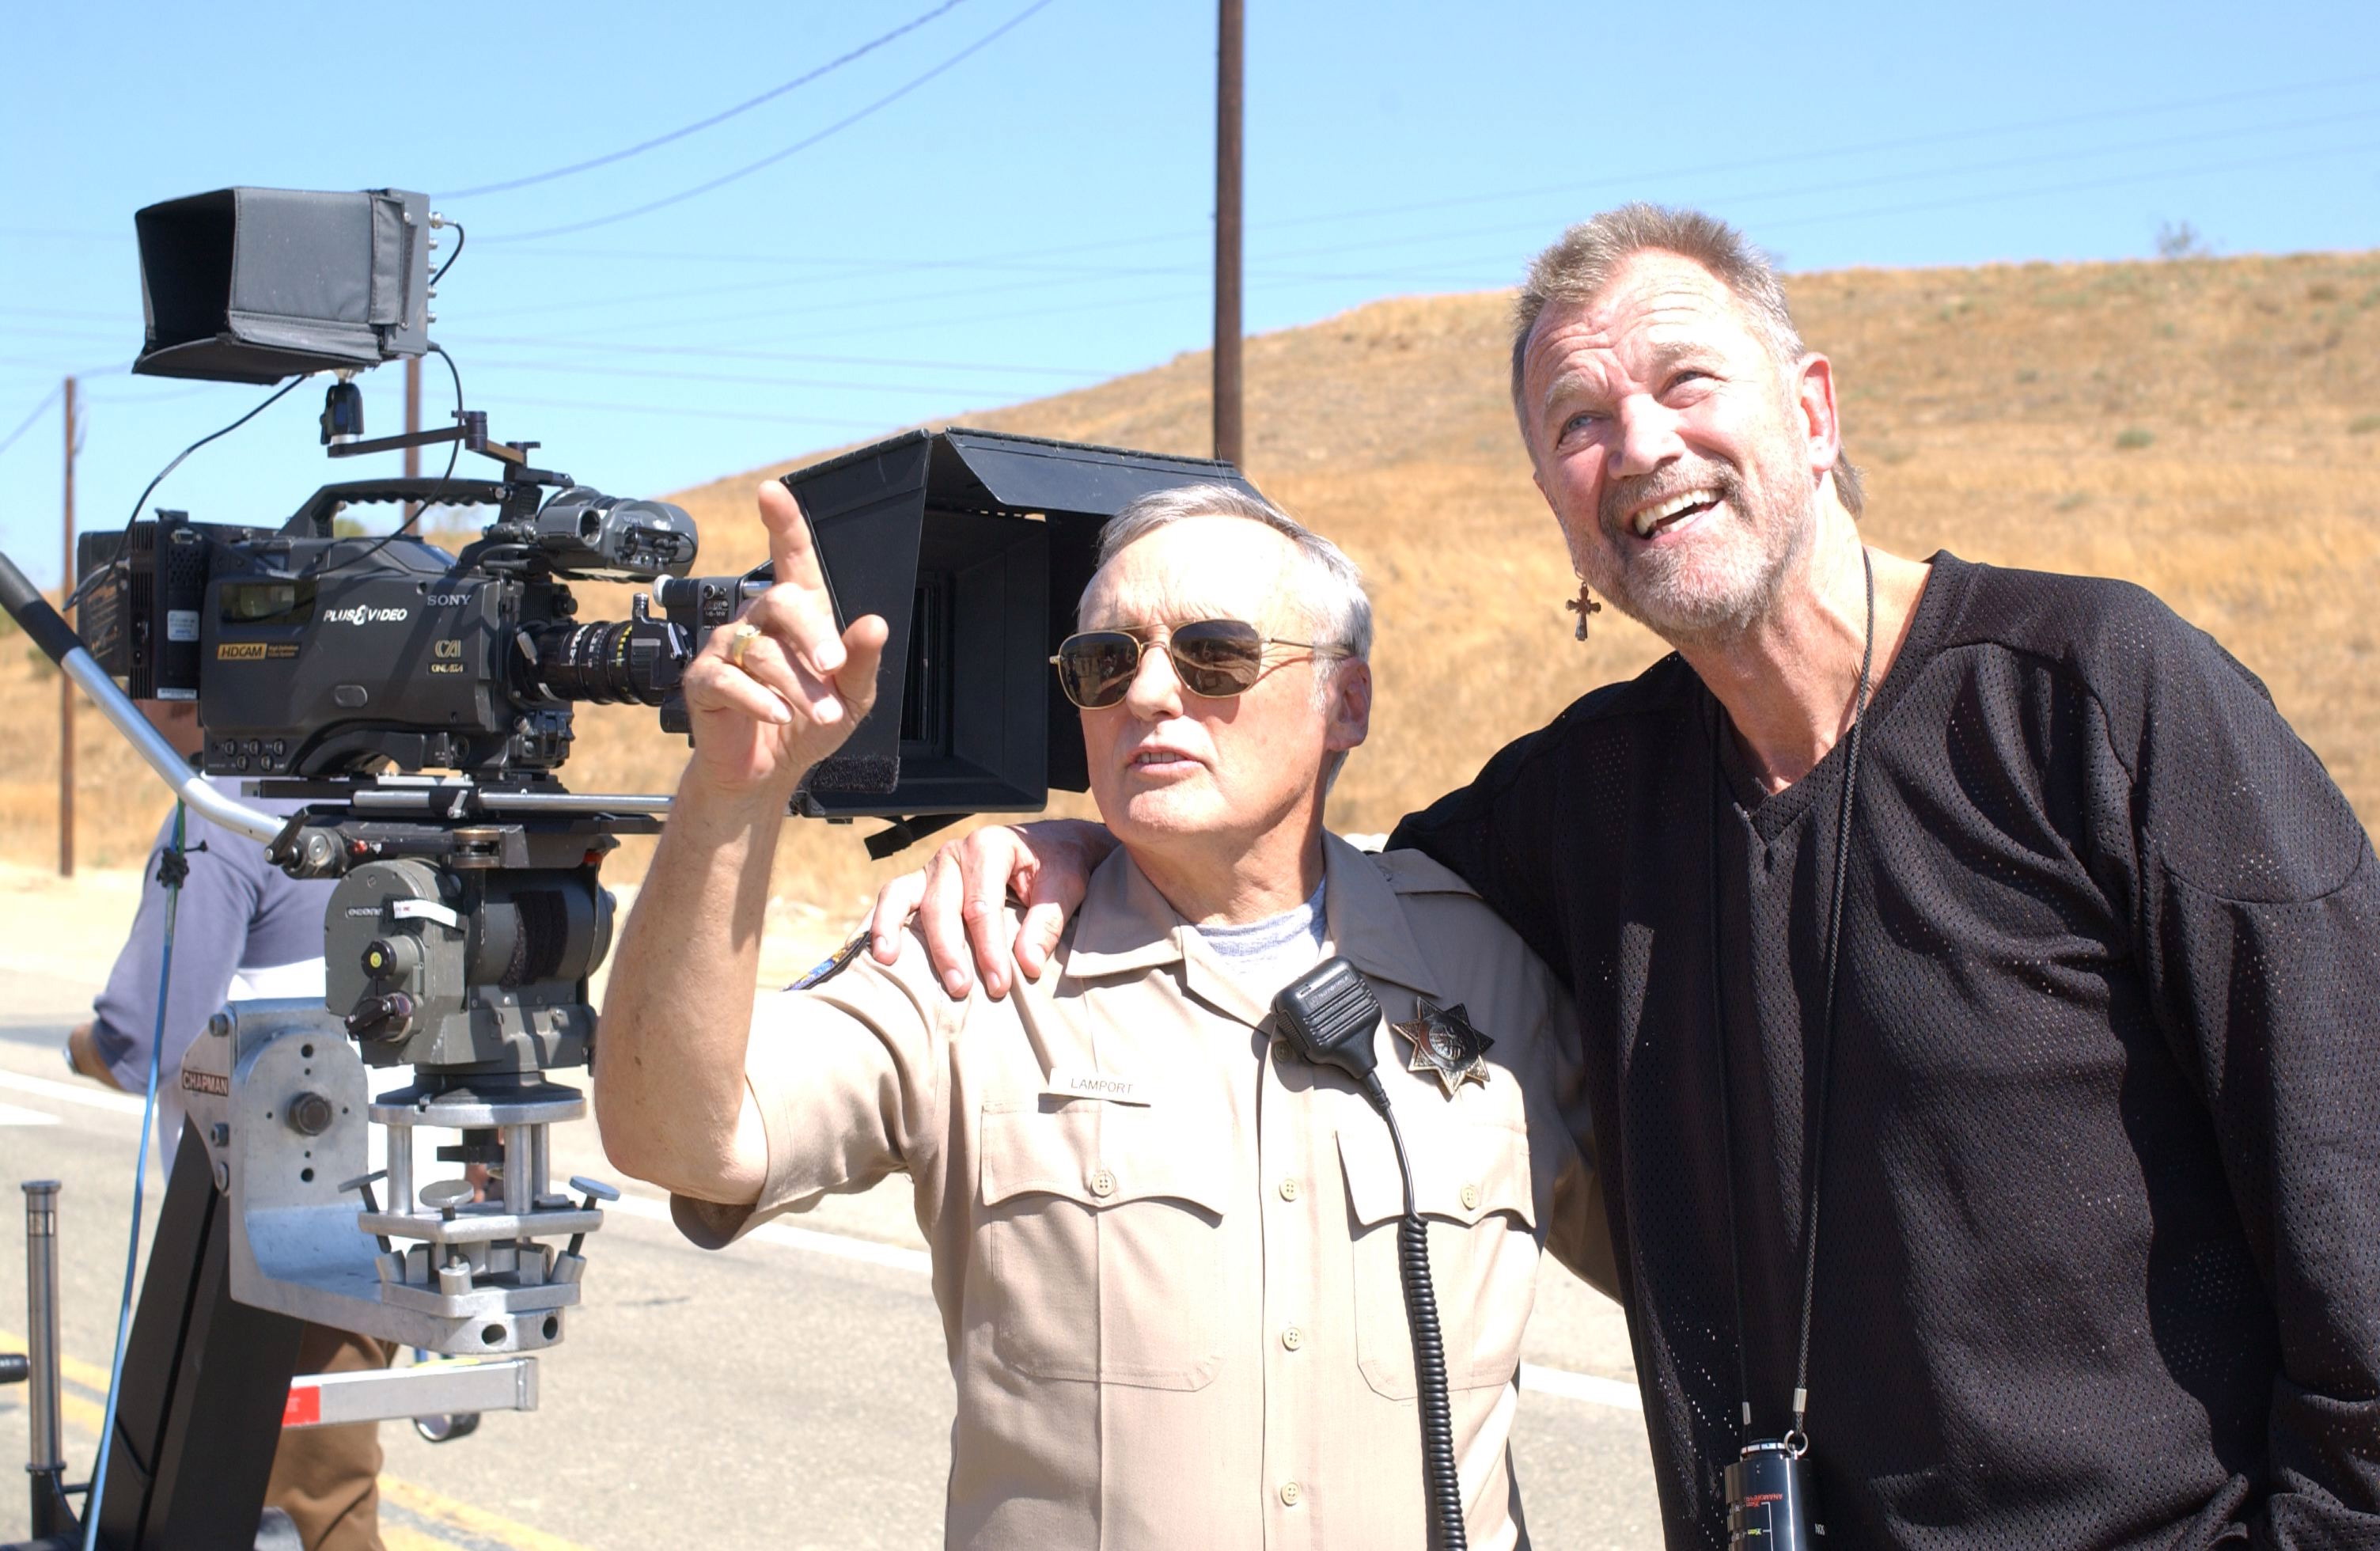 Directing Dennis Hopper in MADE FOR EACH OTHER